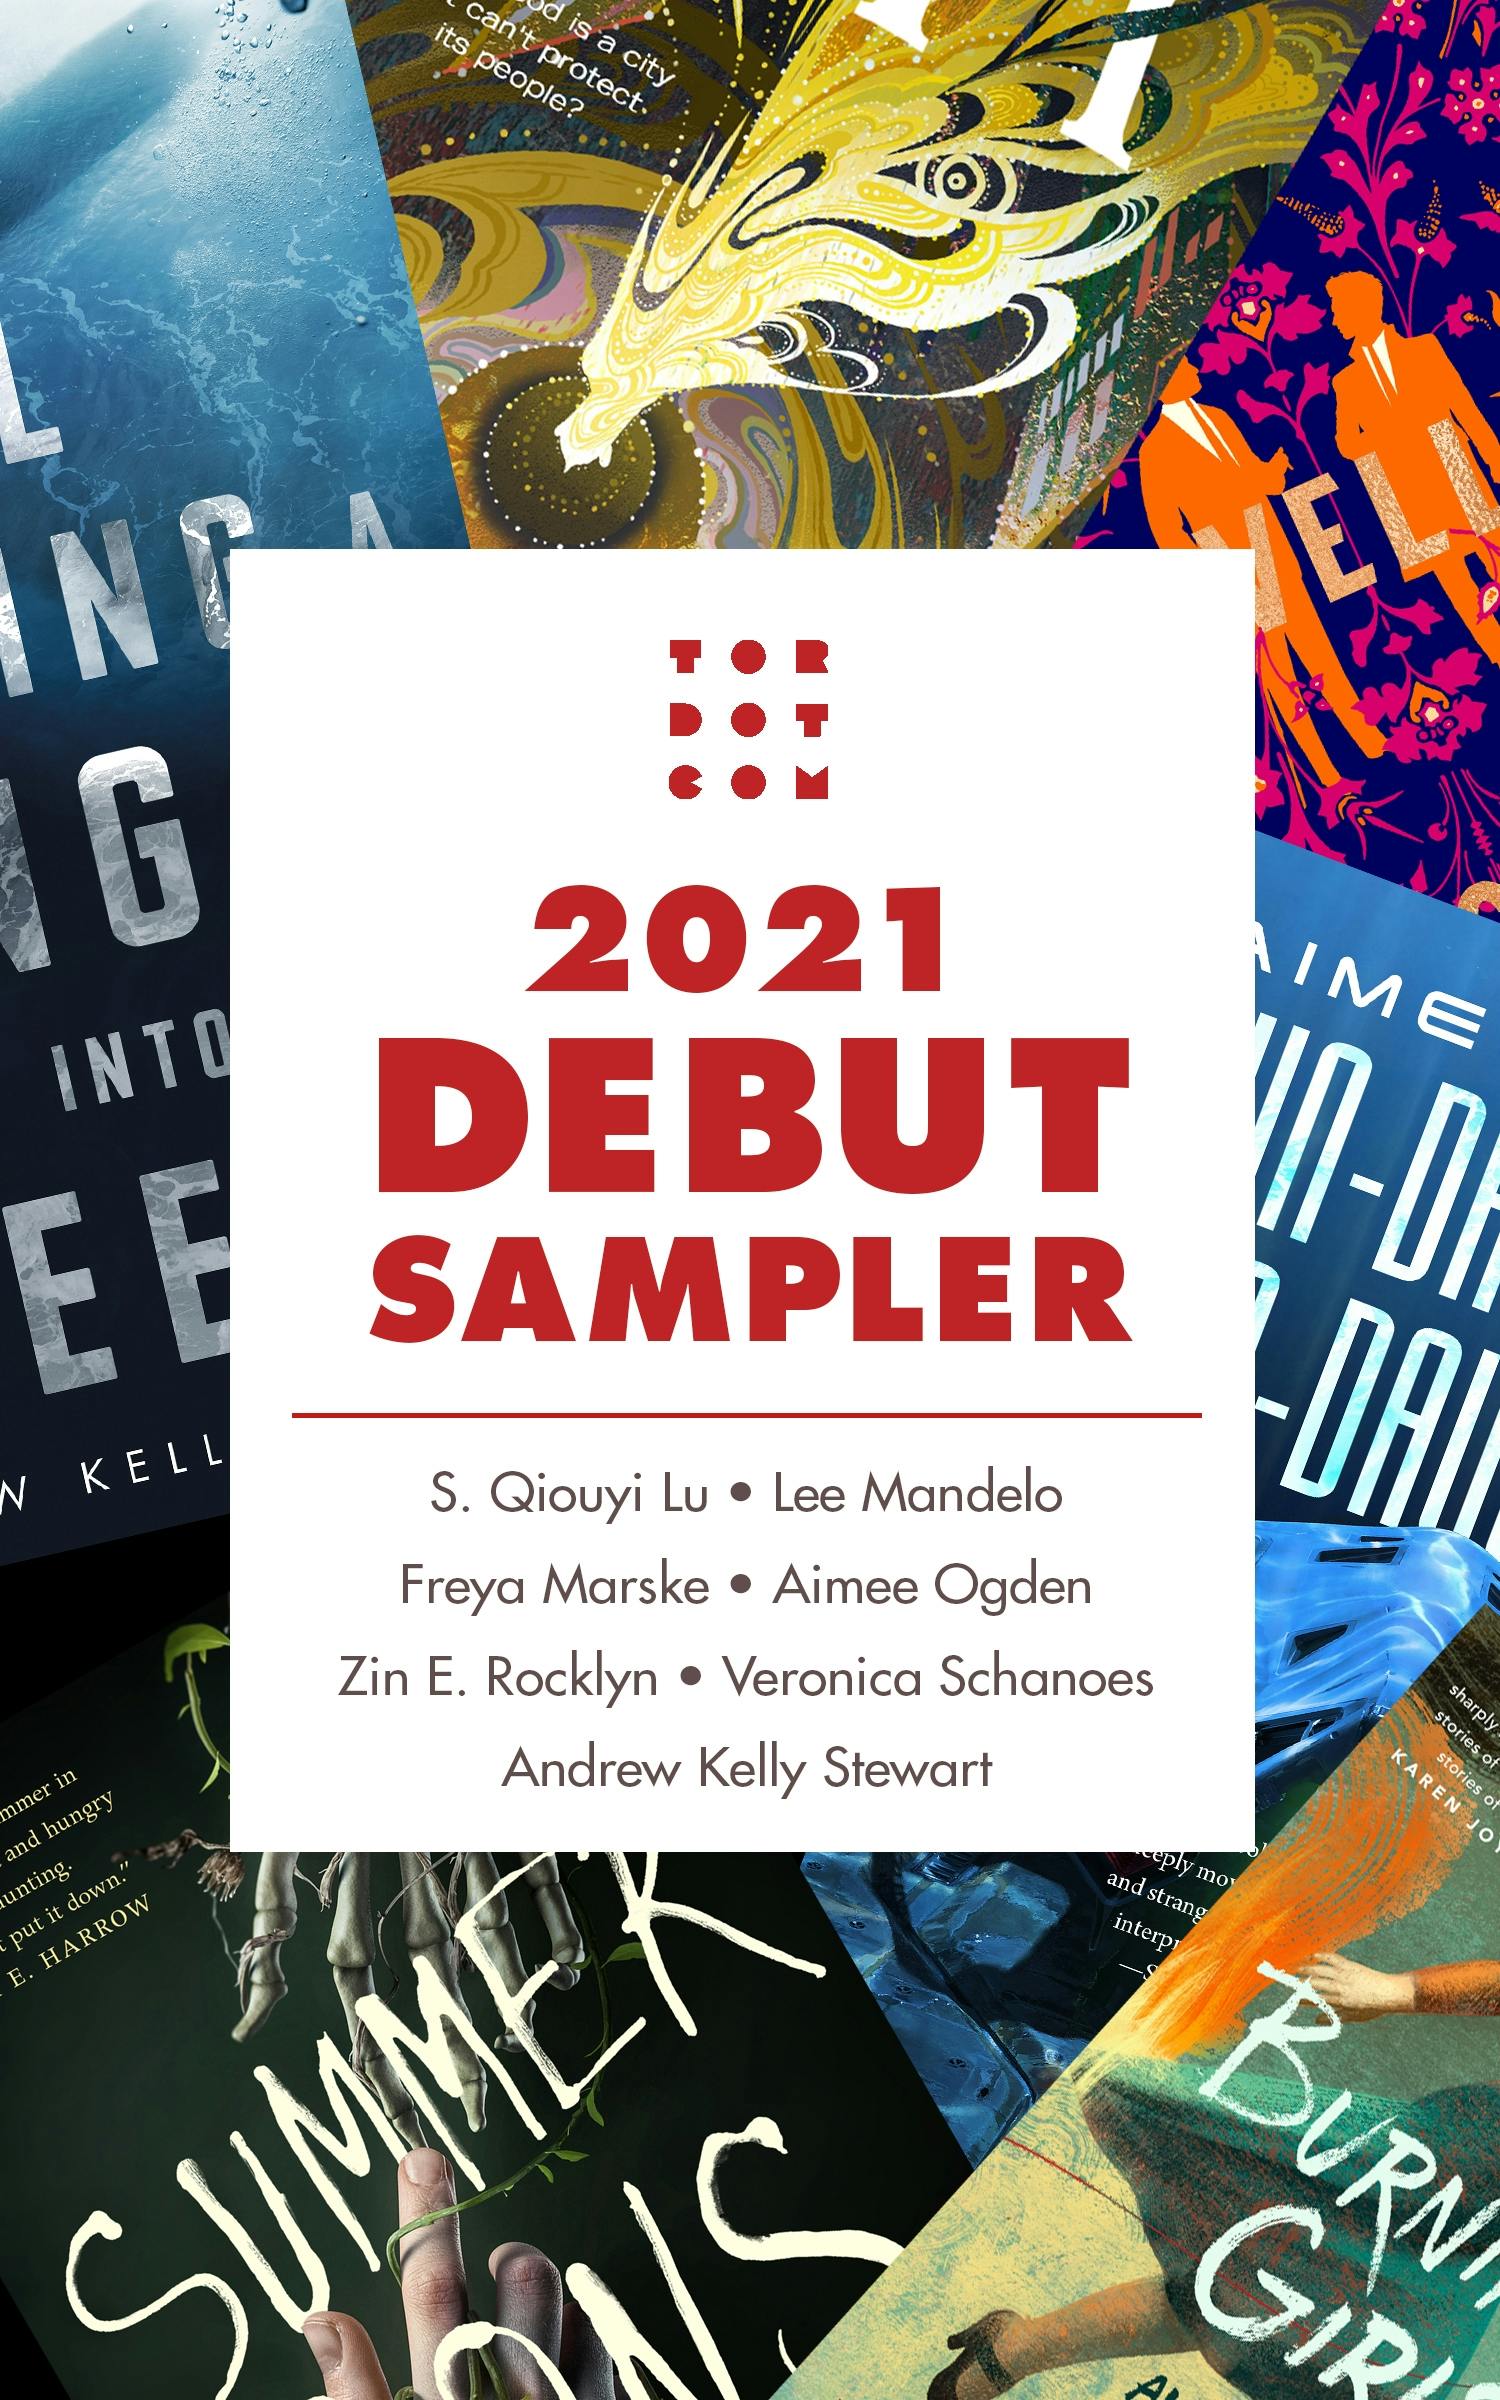 Cover for the book titled as: Tordotcom Publishing 2021 Debut Sampler